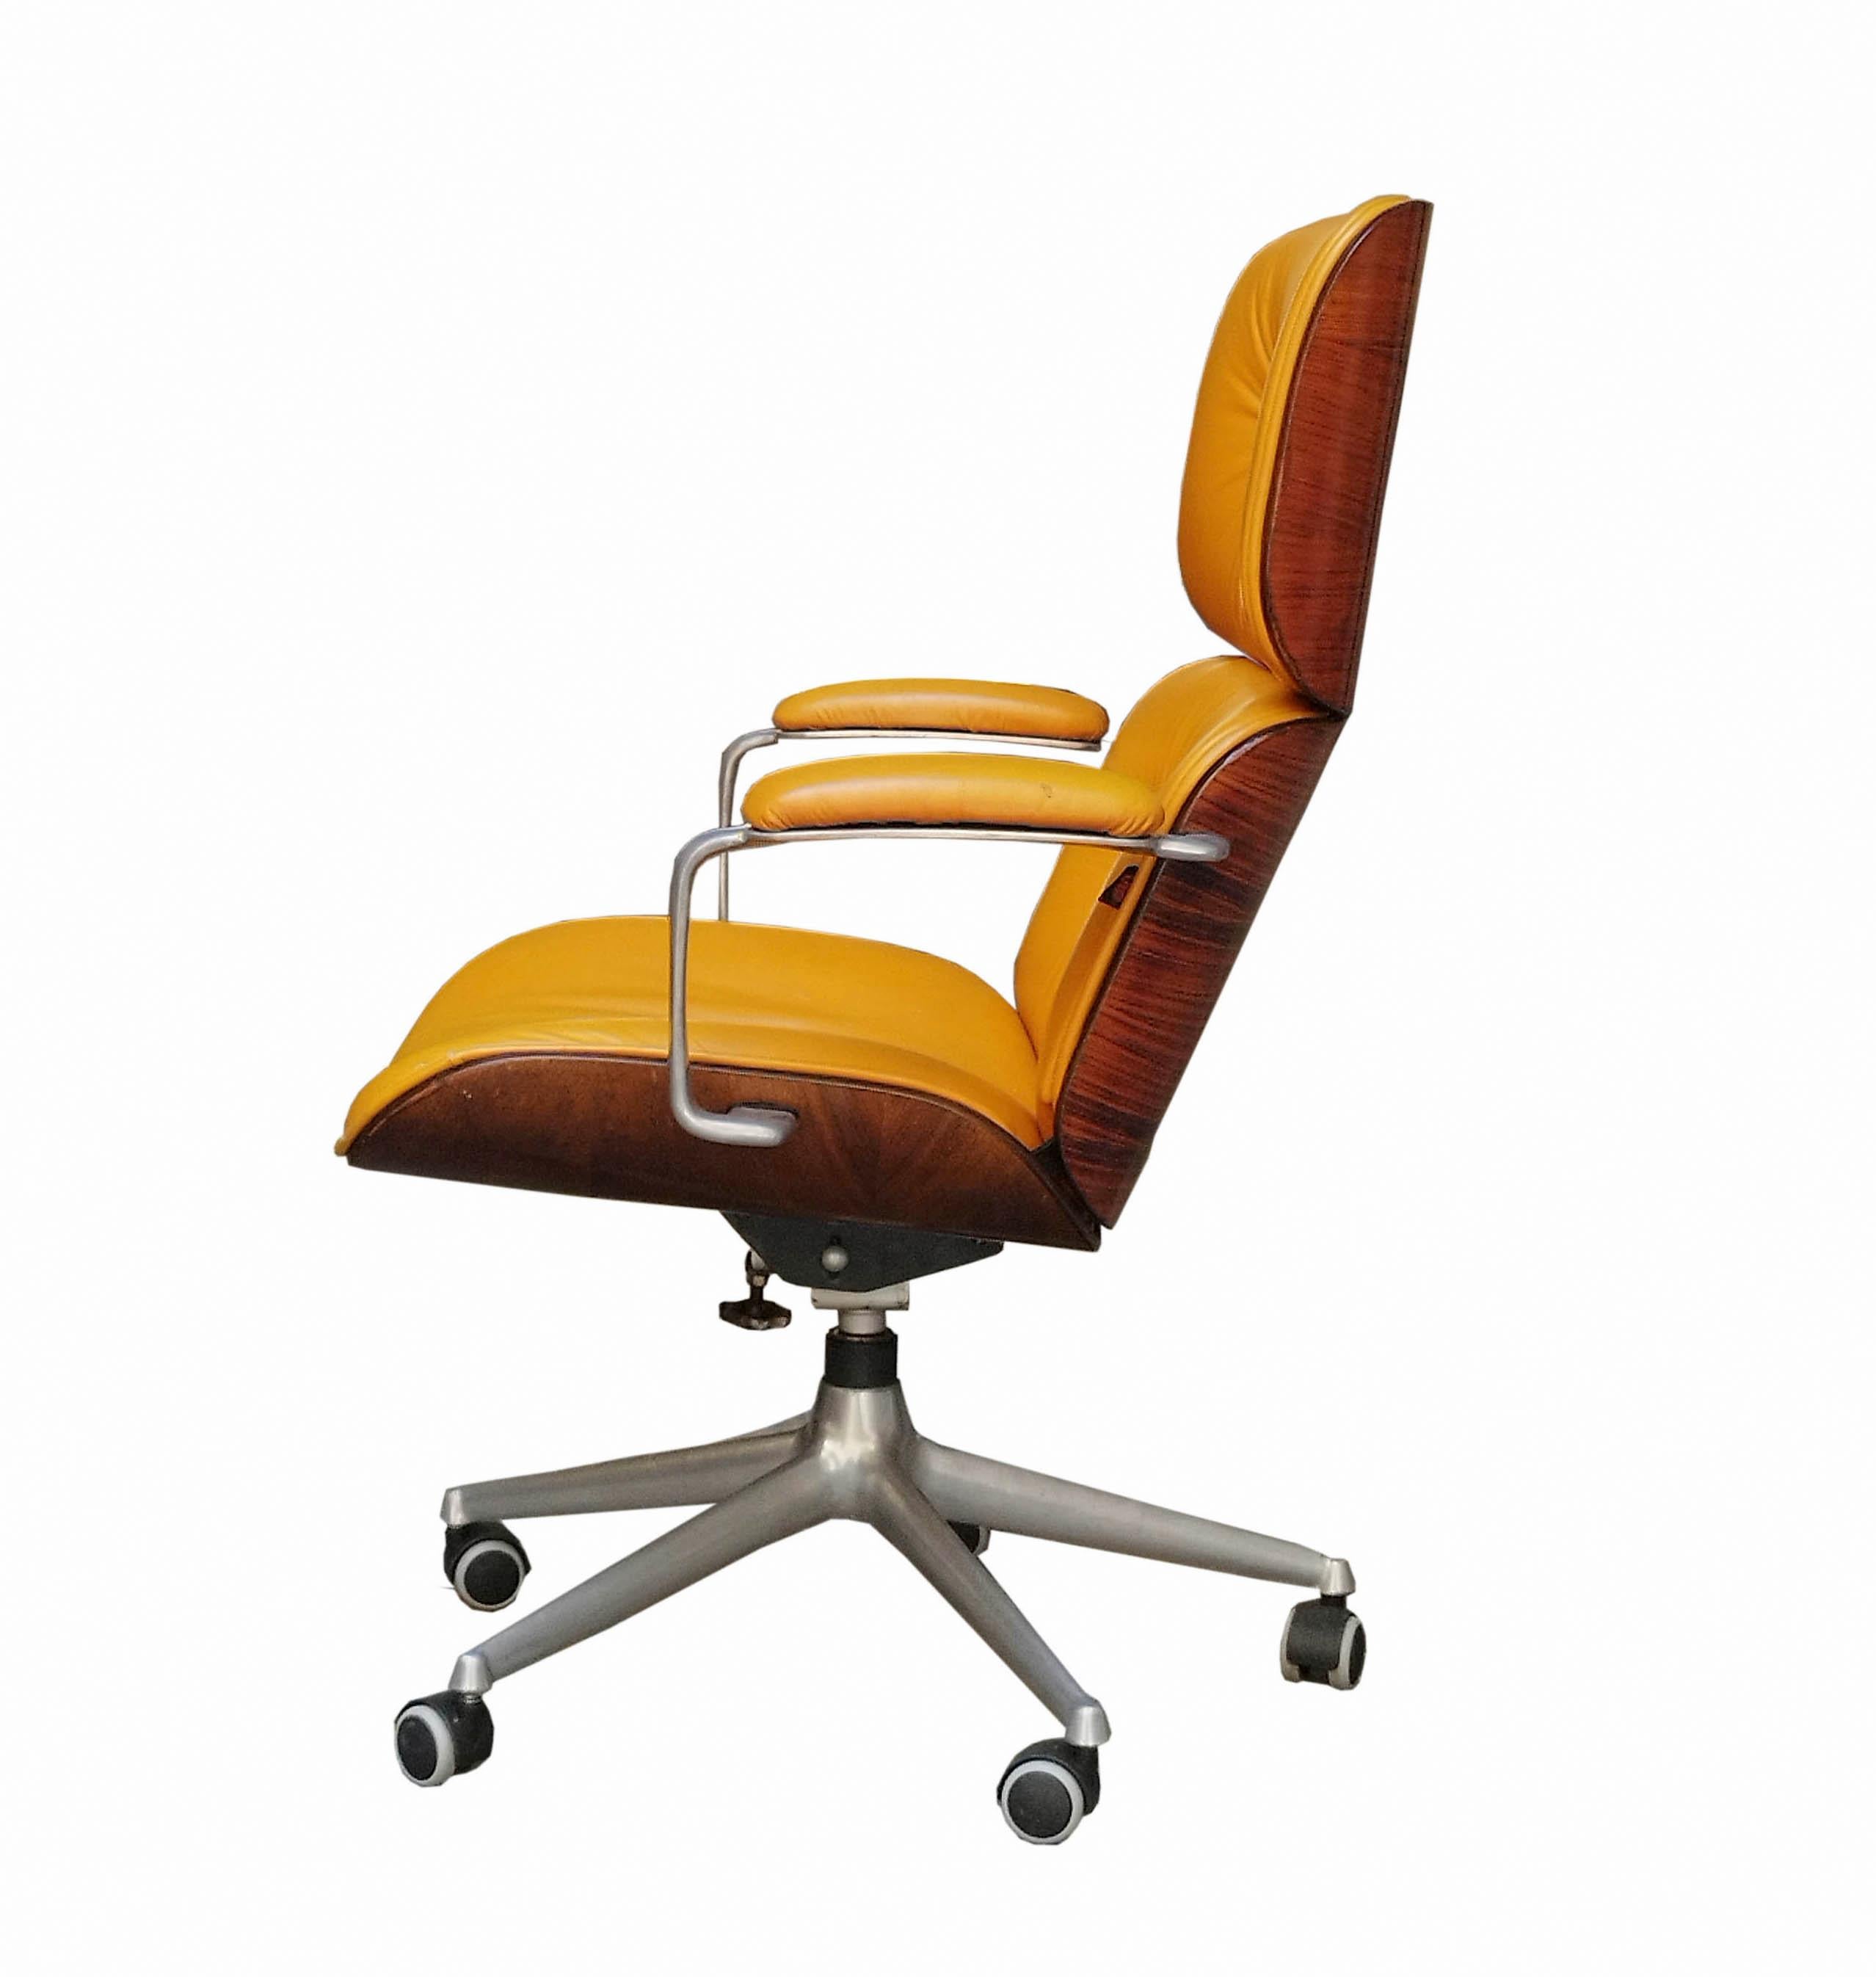 A modern swivel desk chair on castors from the Temi series, an icon of 1950s Italy designed by the famous Ico Parisi for MIM Roma, it features a four-star cast aluminium base, wood veneer and original leather upholstery. The original MIM Roma label